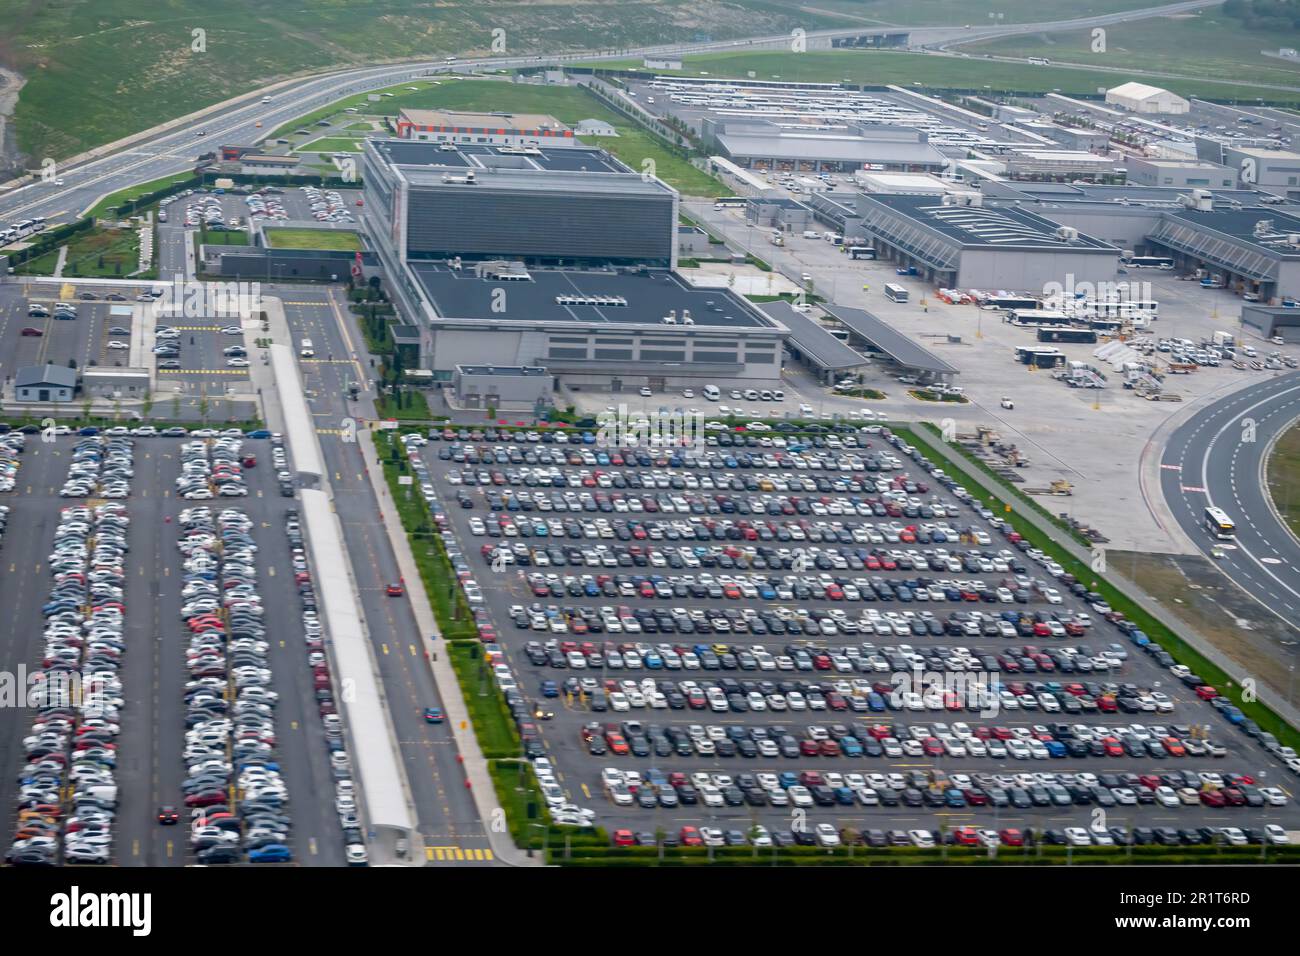 Aerial view of Istanbul Airport Car parking area Stock Photo